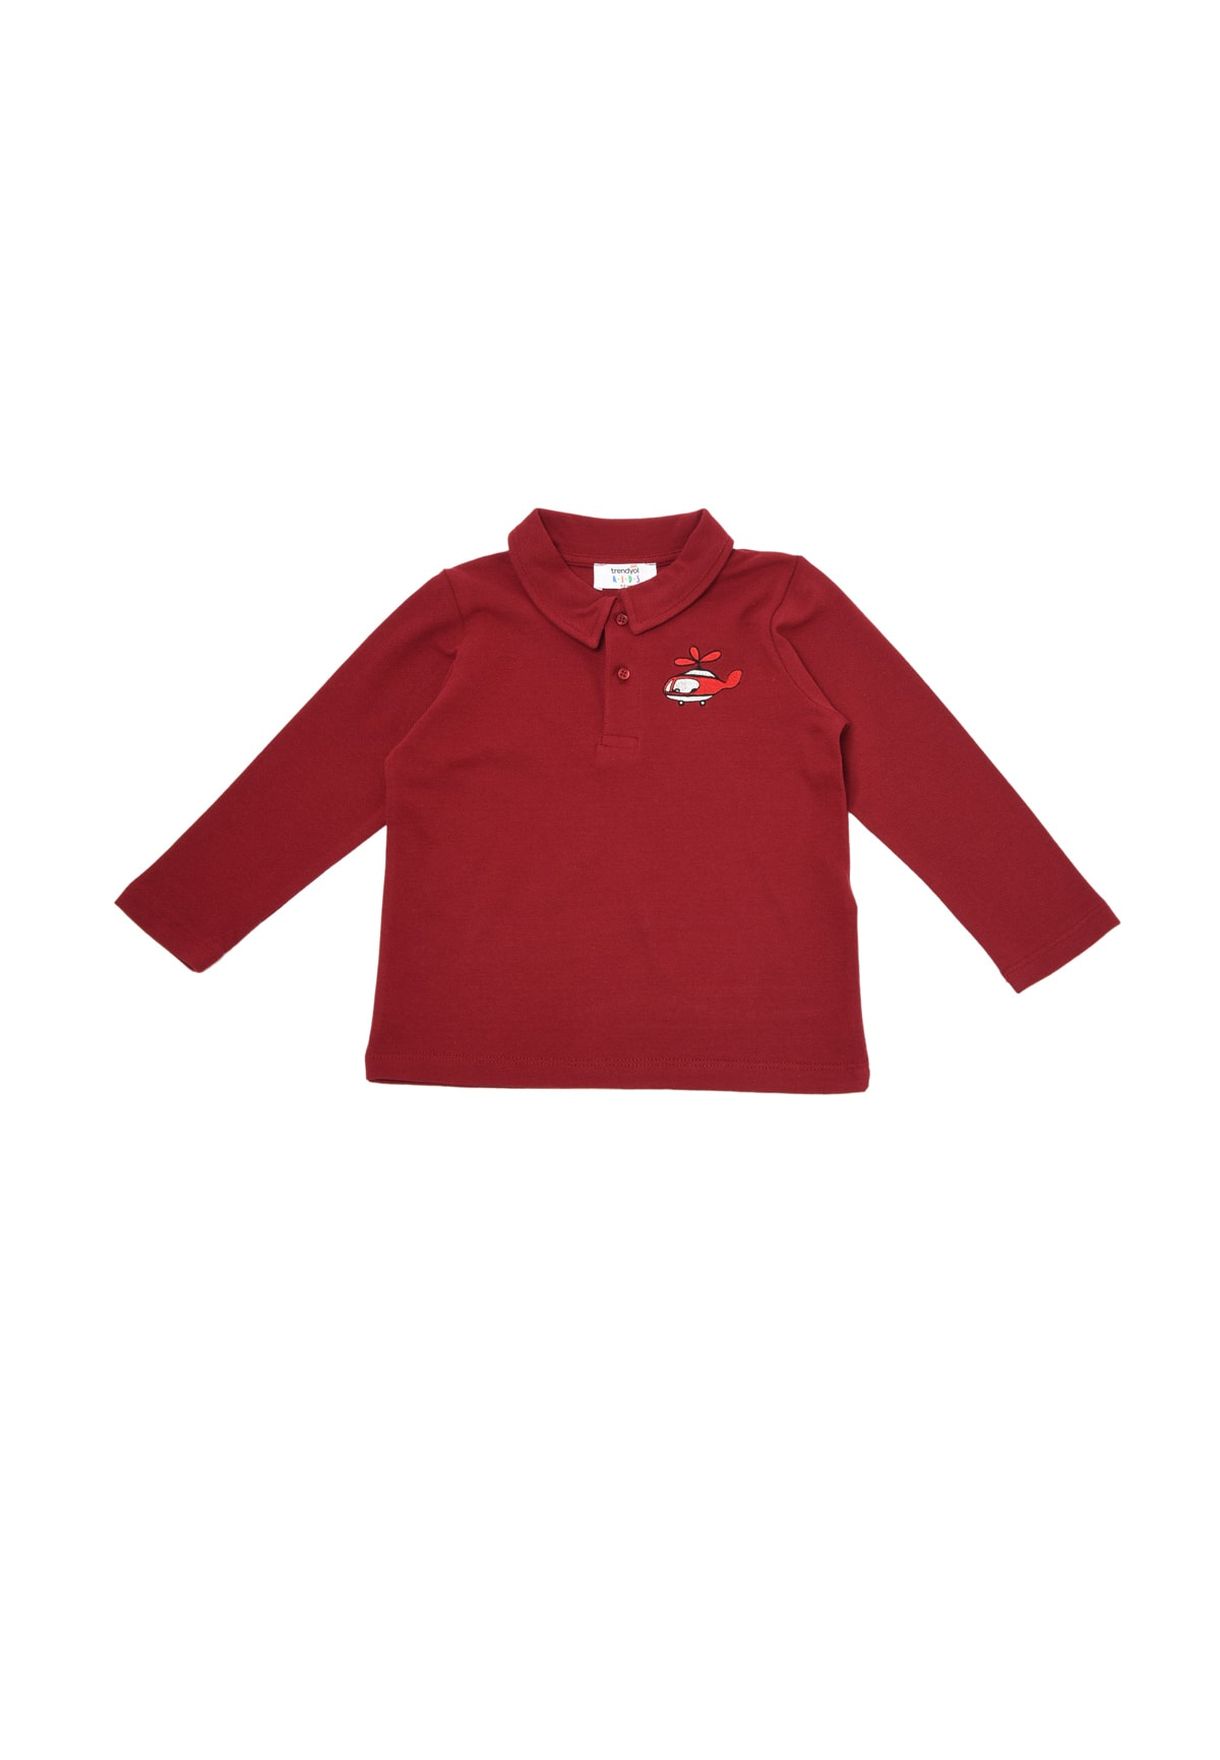 Kids Embroidered Helicopter Polo